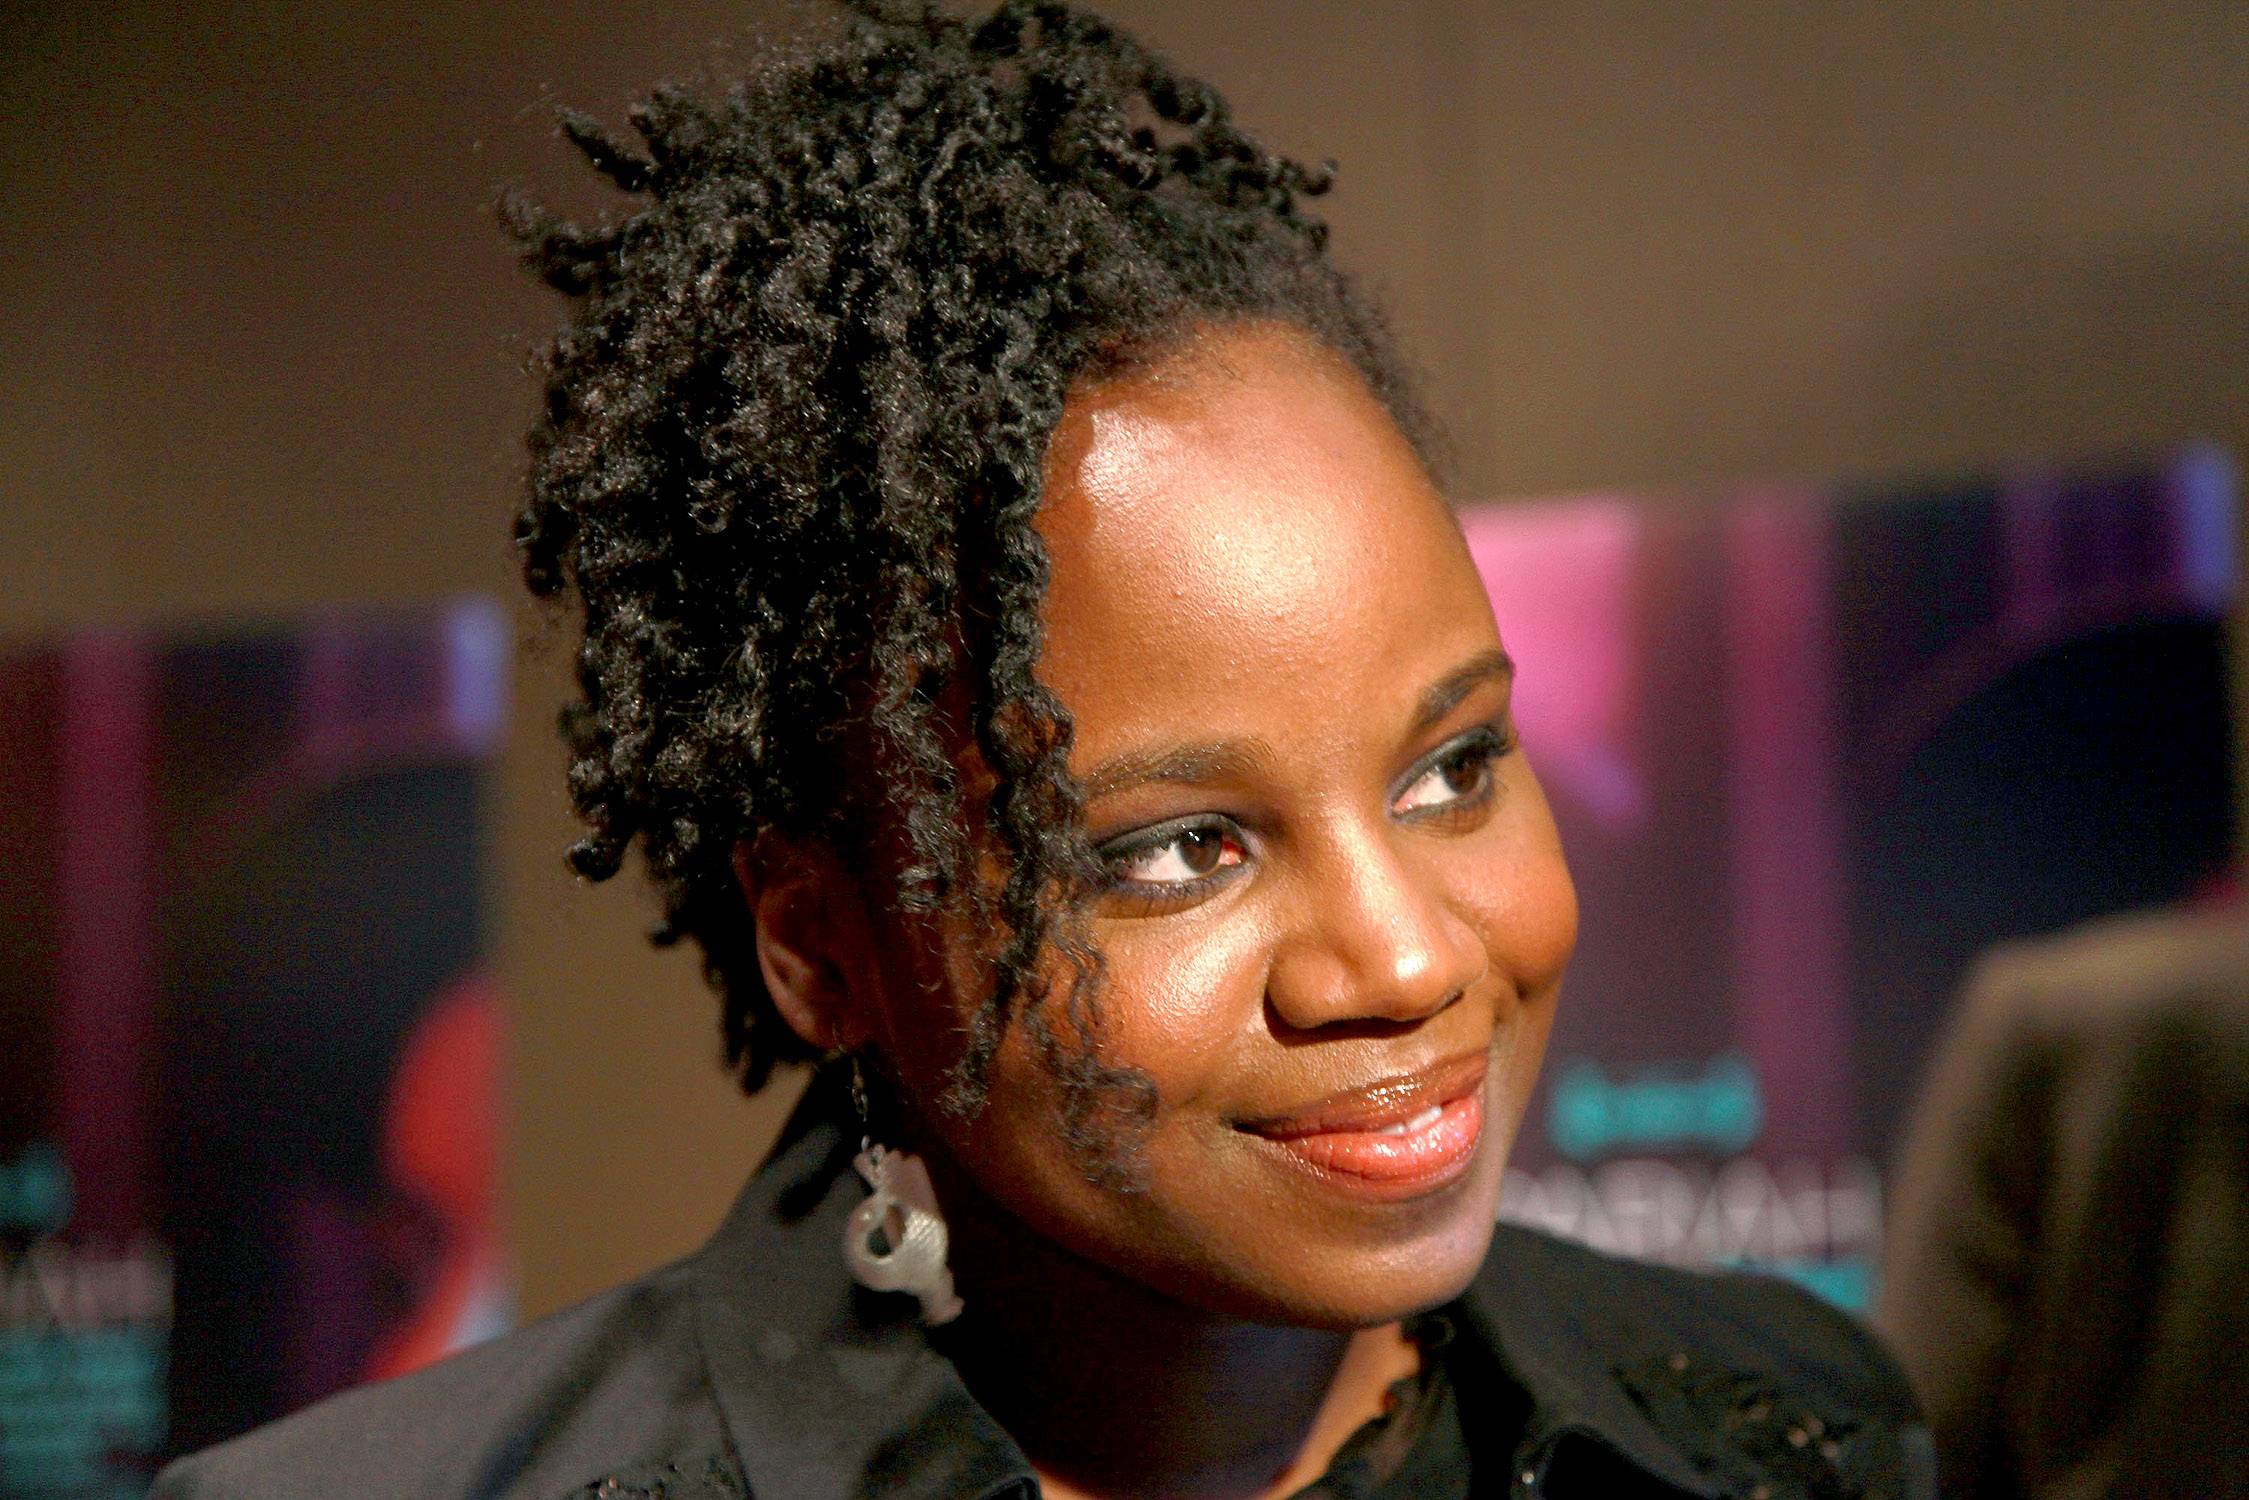 Director Dee Rees on Kim Wayans auditioning for the film Pariah: - “When Kim’s name first came up, I thought In Living Color is great, but I’m not sure. But Kim was the first one to walk in the room and immediately have Audrey’s loneliness and vulnerability.”(Photo: Astrid Stawiarz/Getty Images)